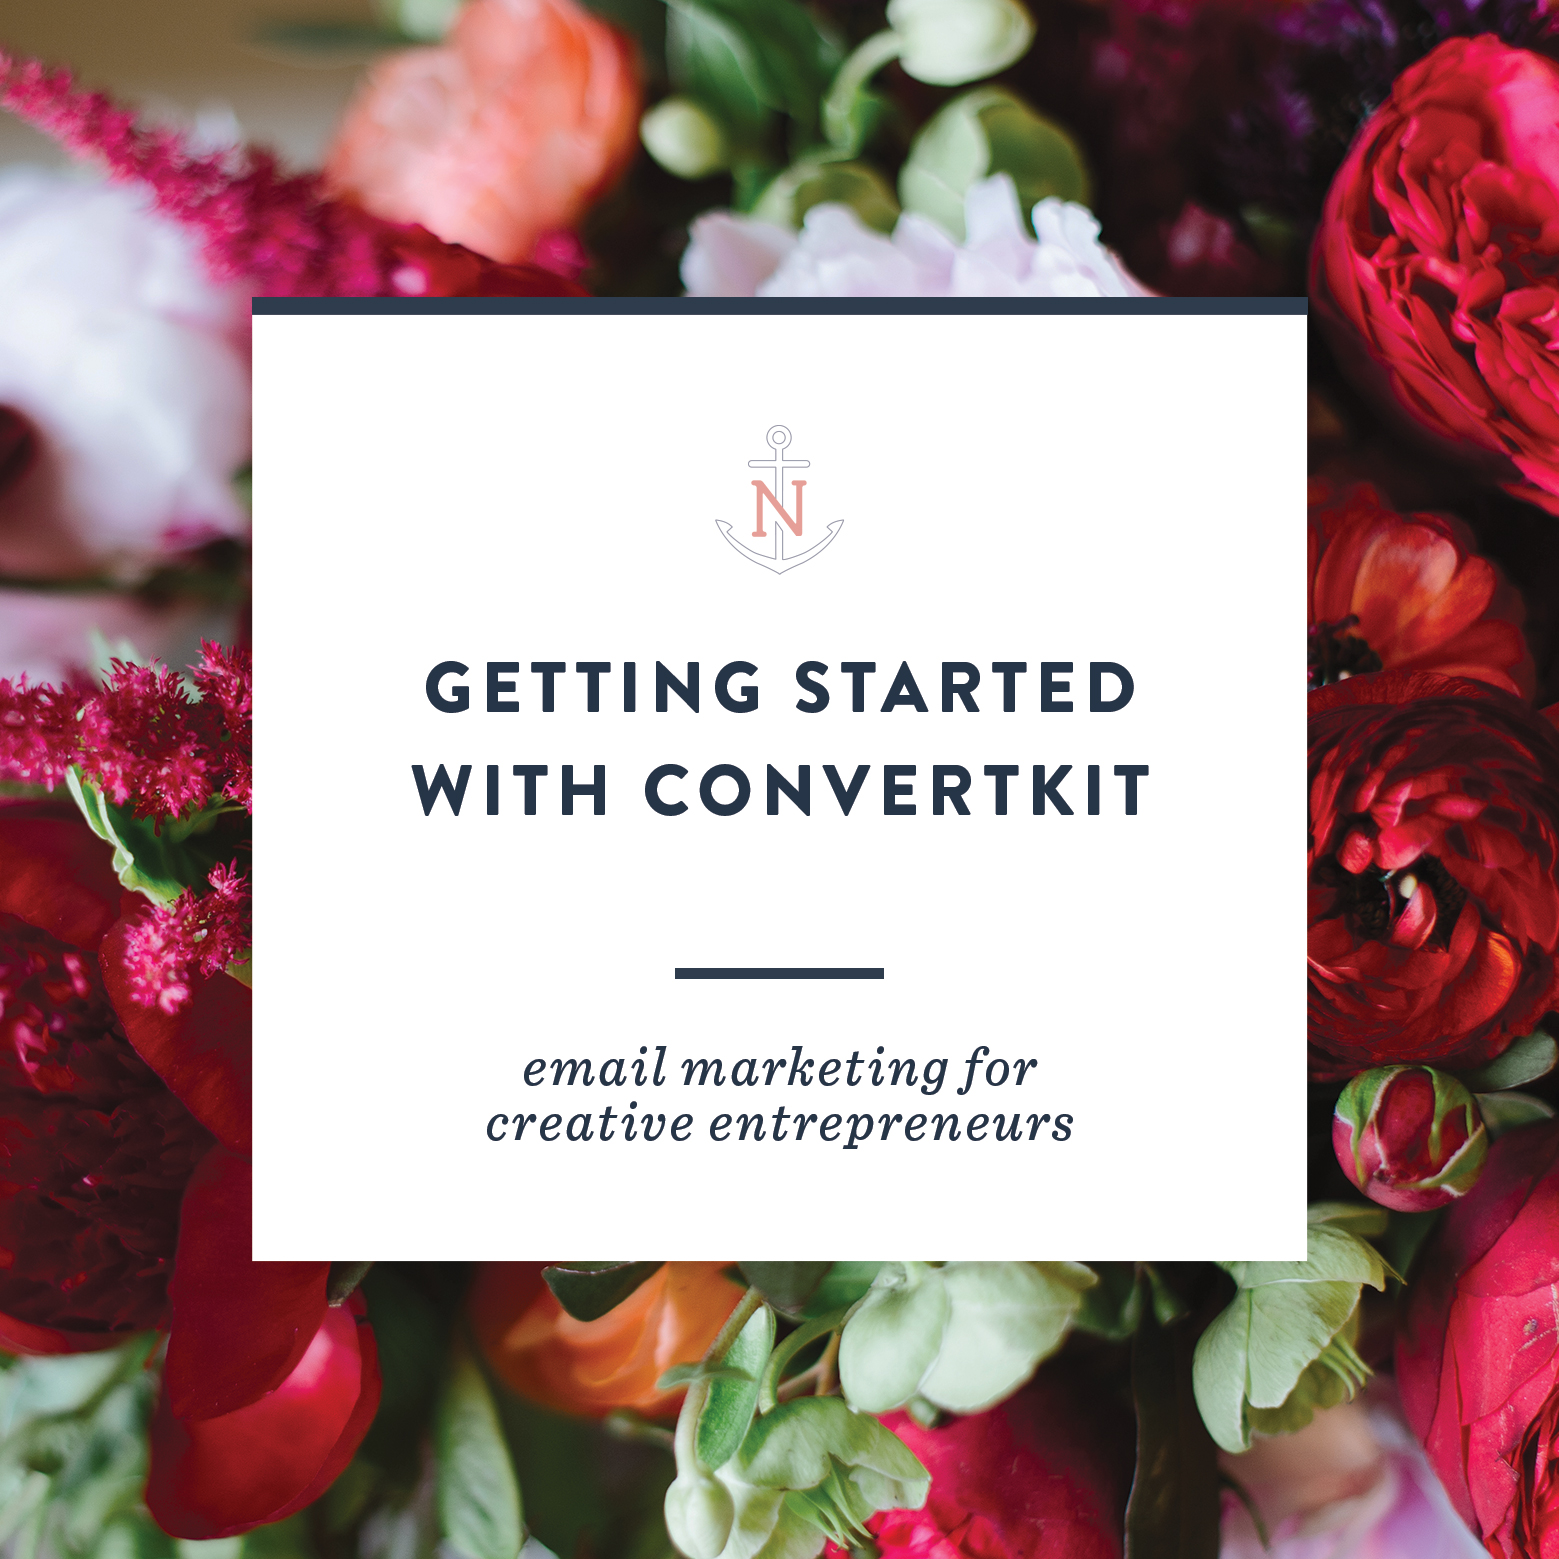 Getting Started with Convertkit â€” Email marketing tips for bloggers and small business owners similar to Mailchimp, Aweber, GetResponse, or Infusionsoft.